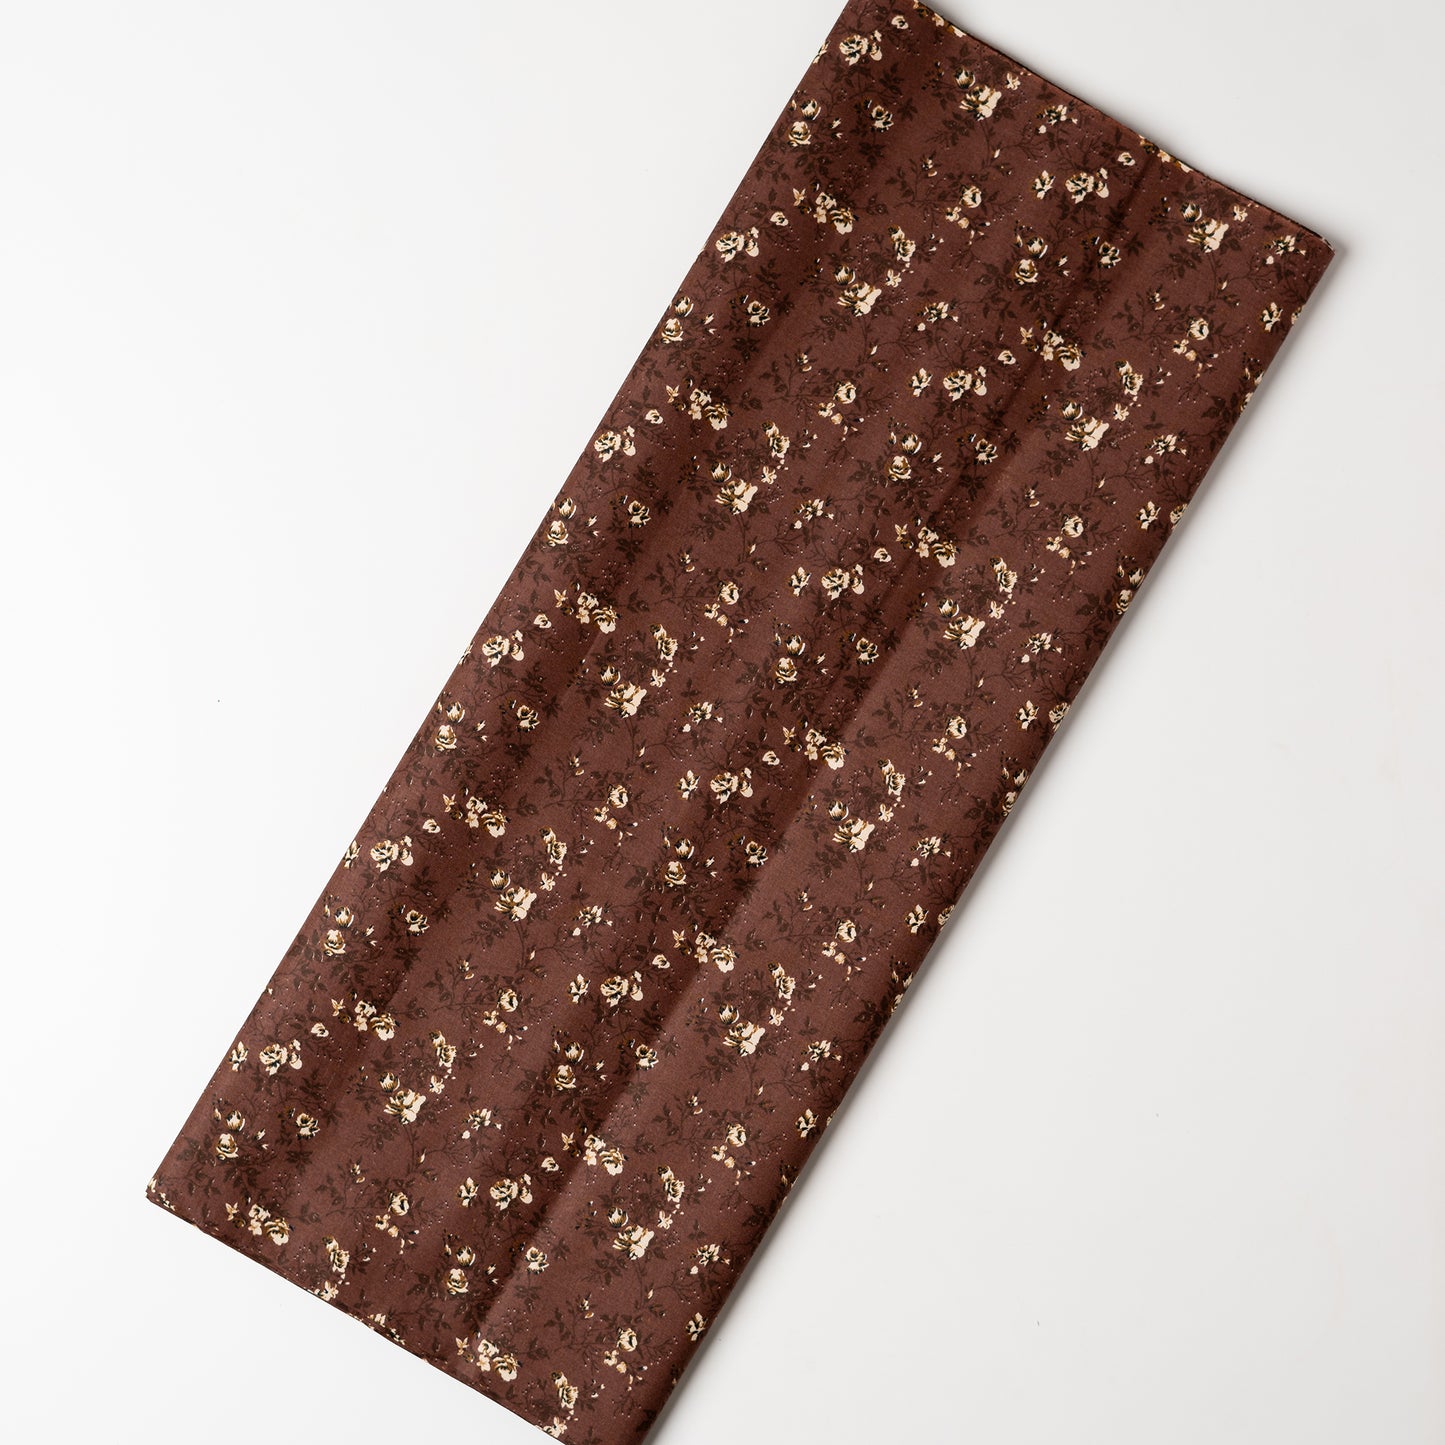 Brown color cotton printed running fabrics with cream color floral prints